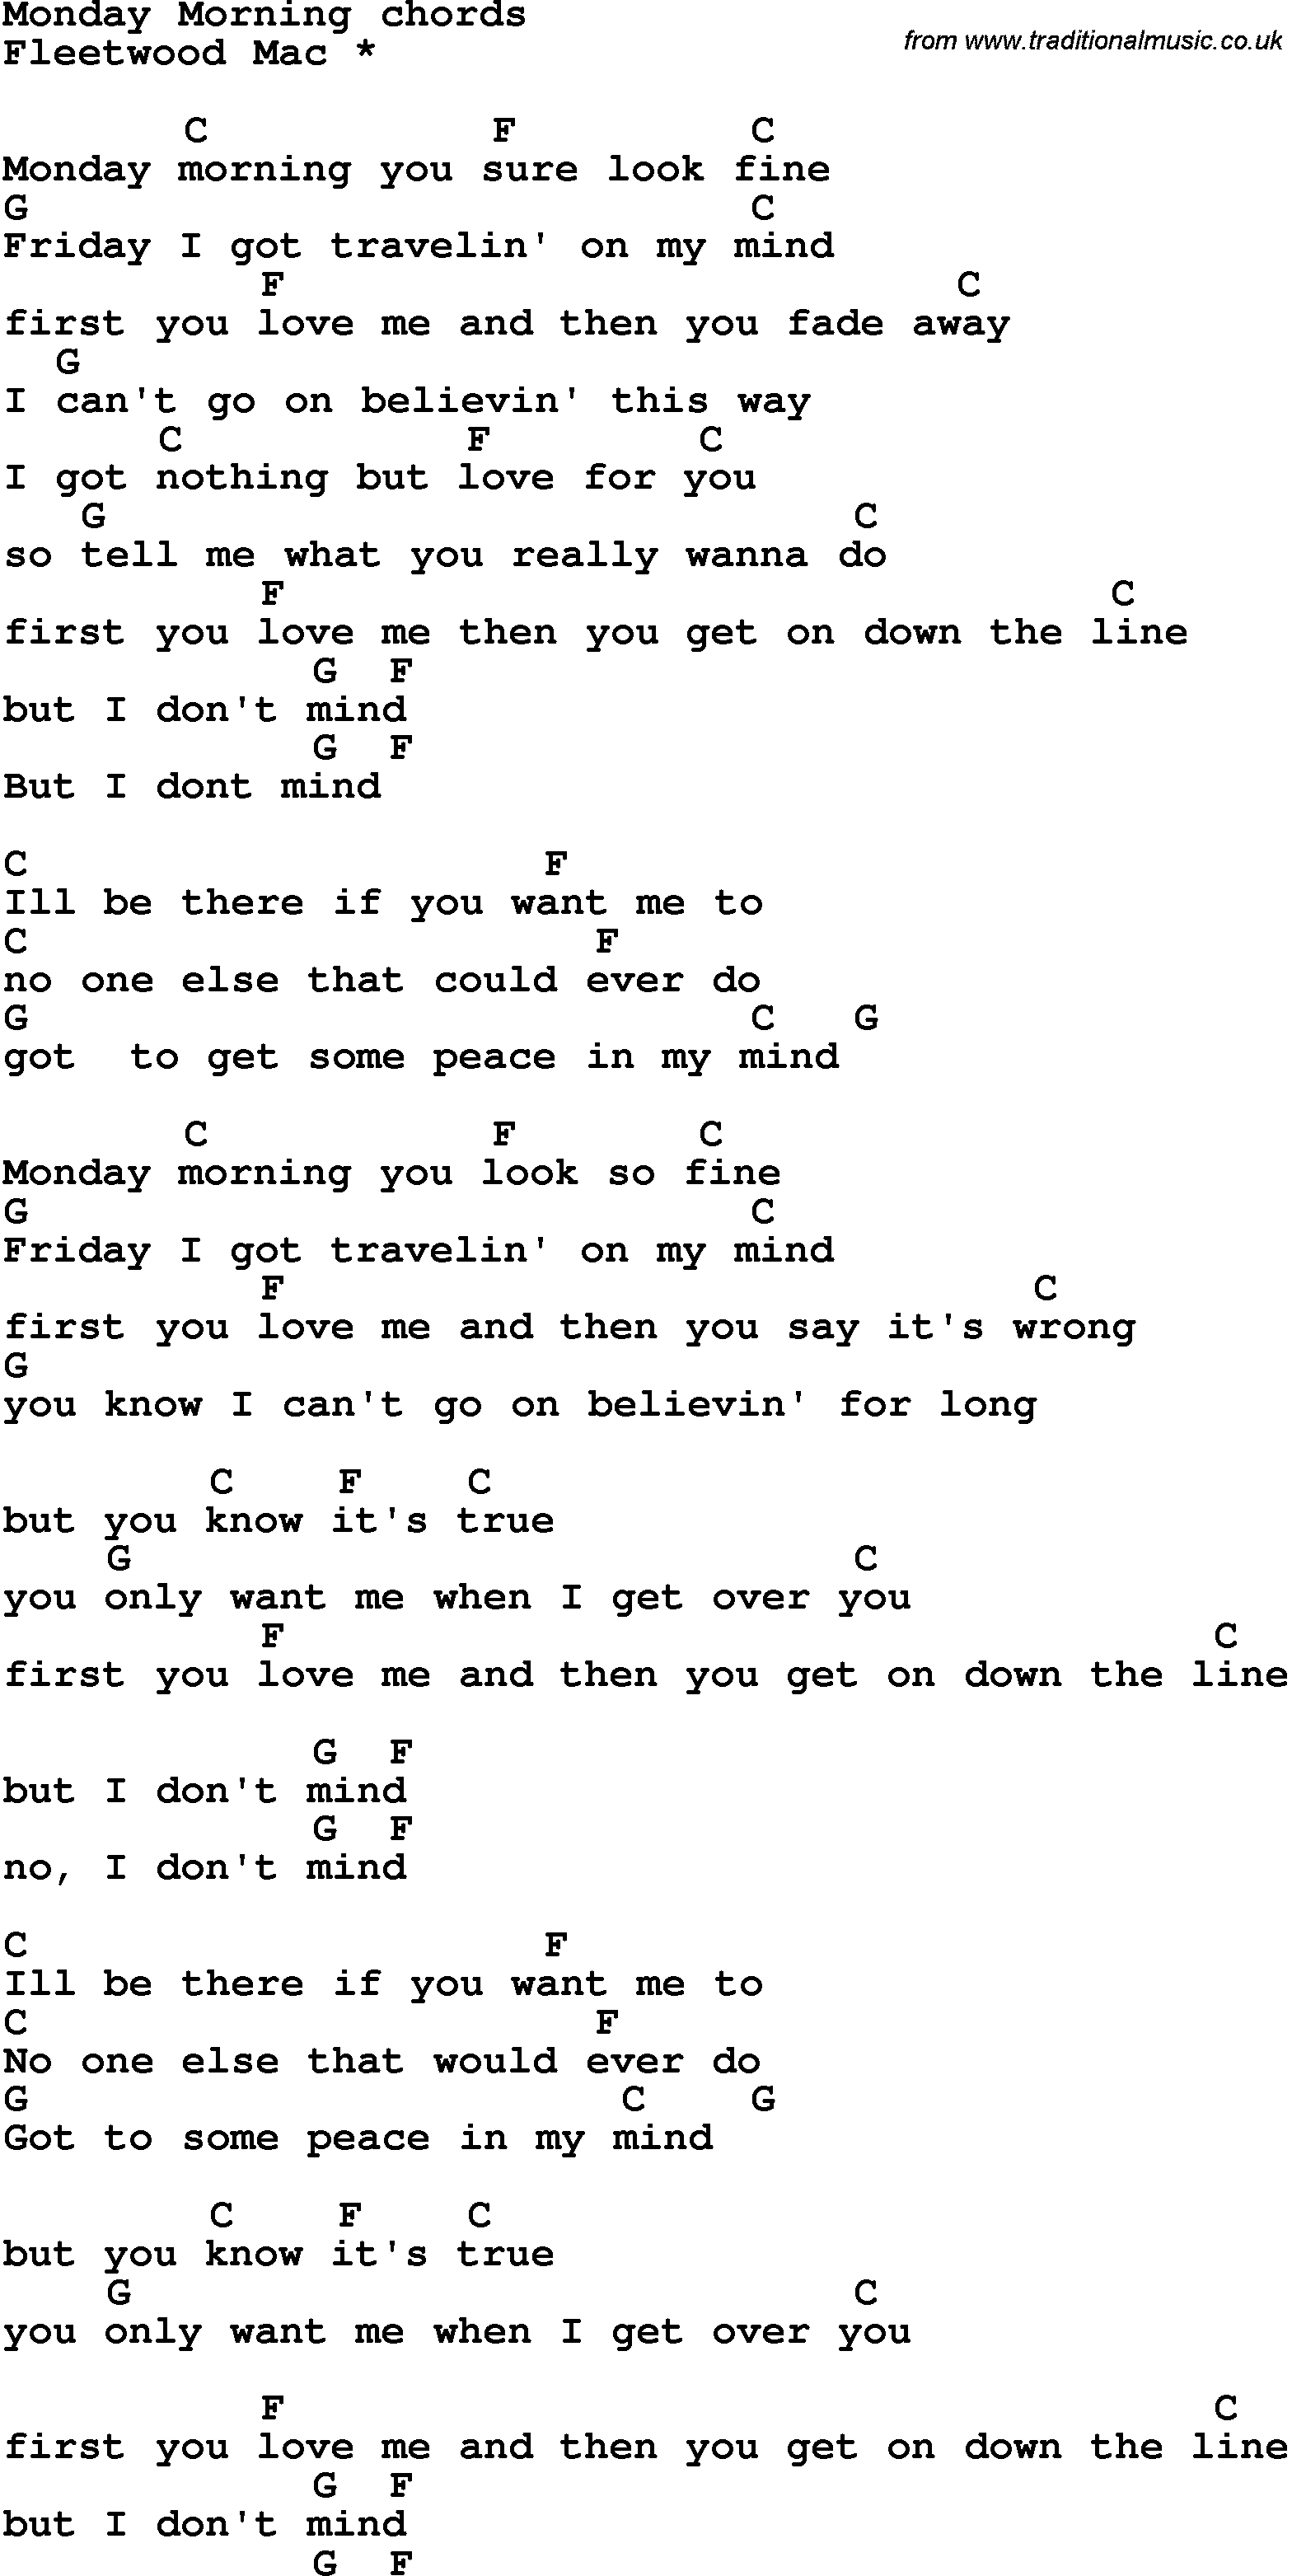 Song Lyrics with guitar chords for Monday Morning